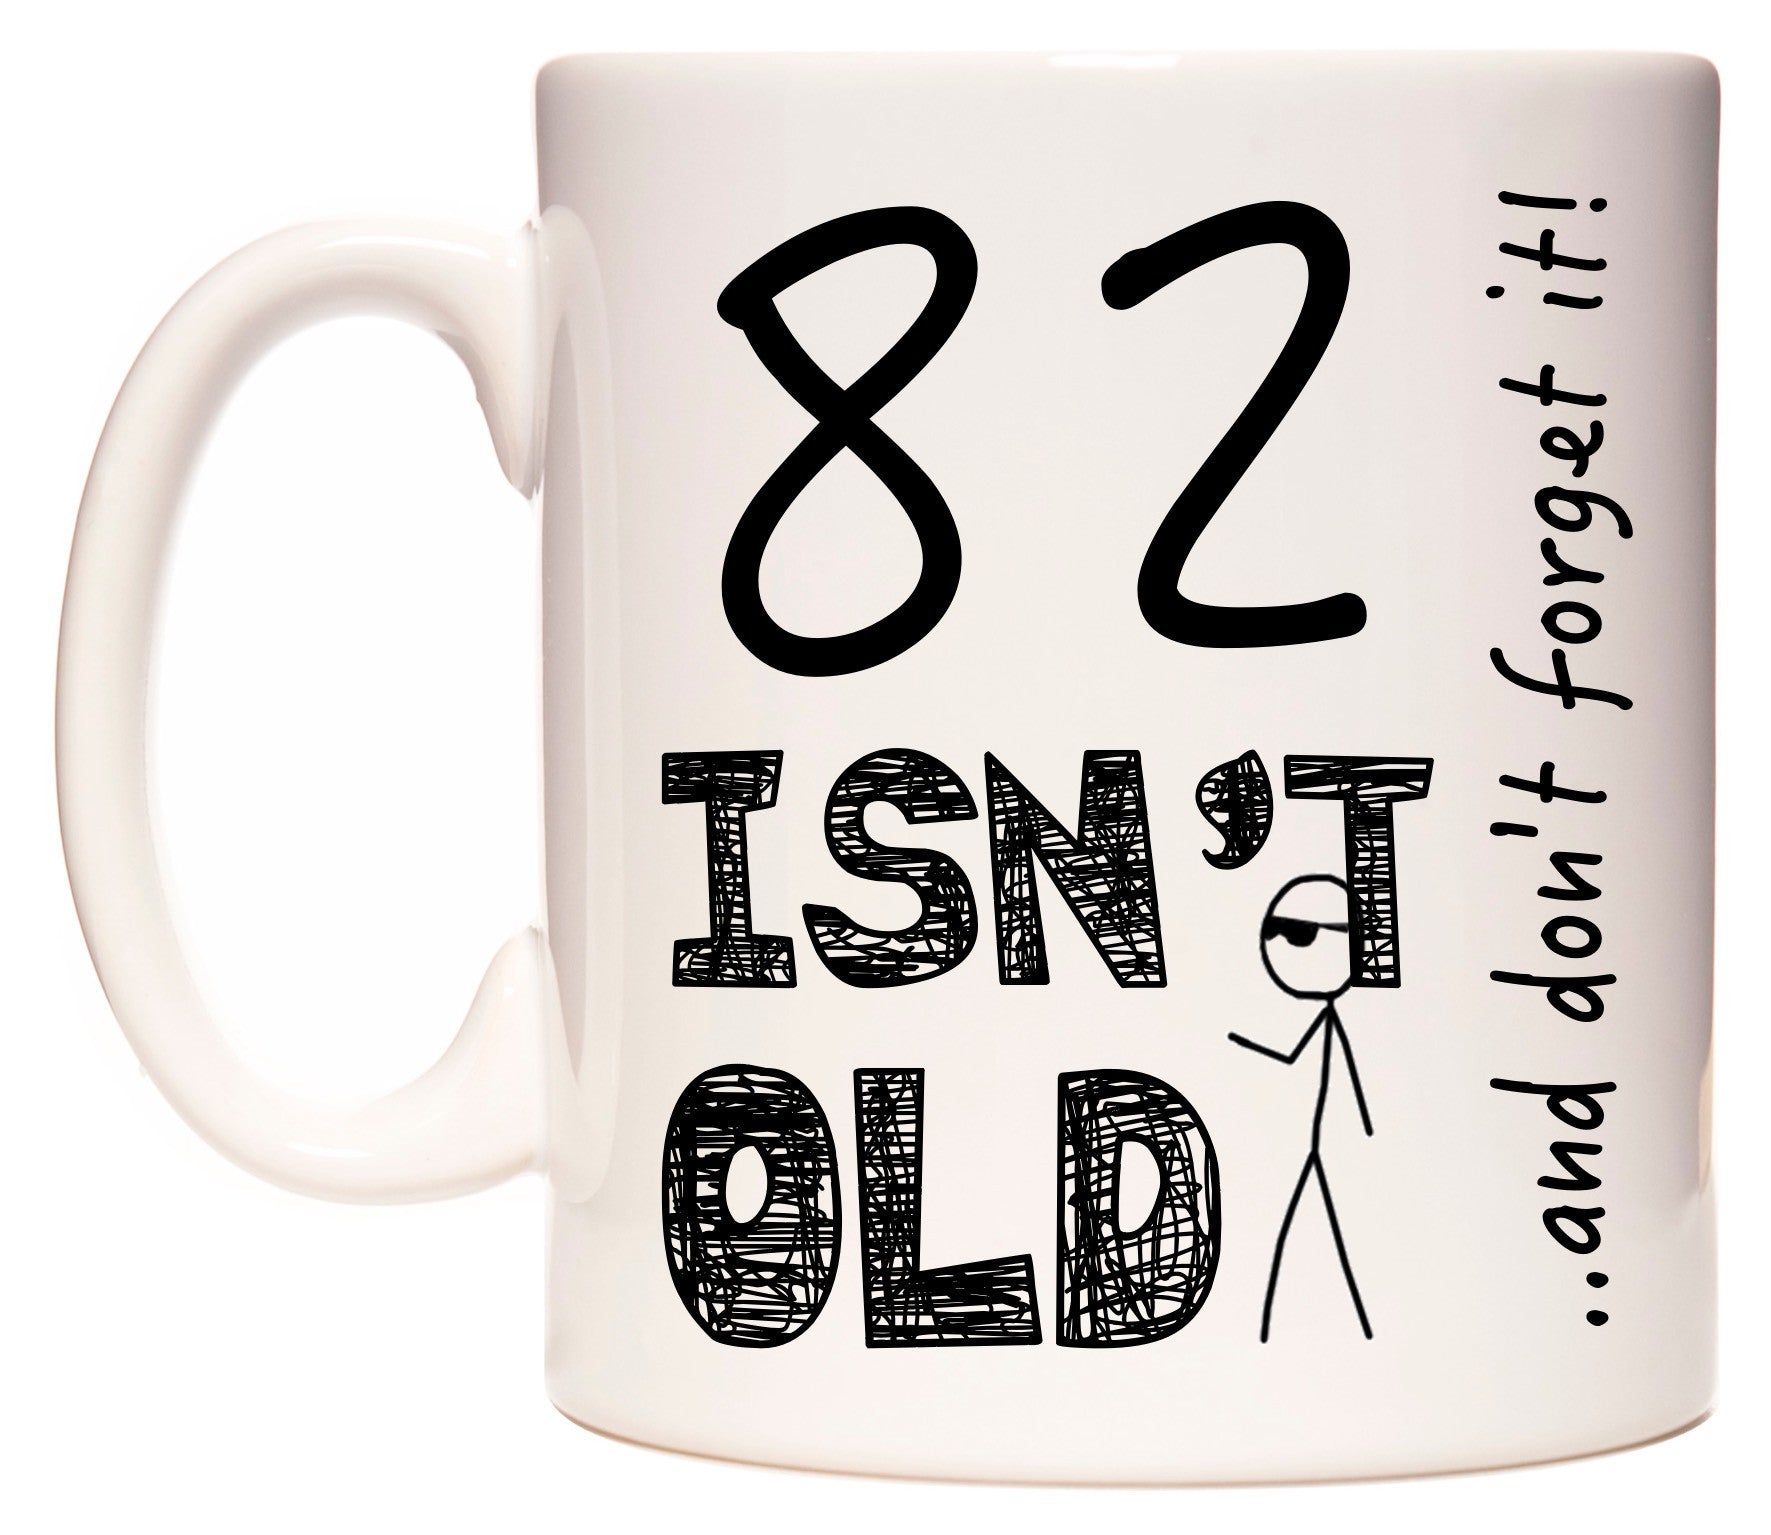 This mug features 82 Isn't Old